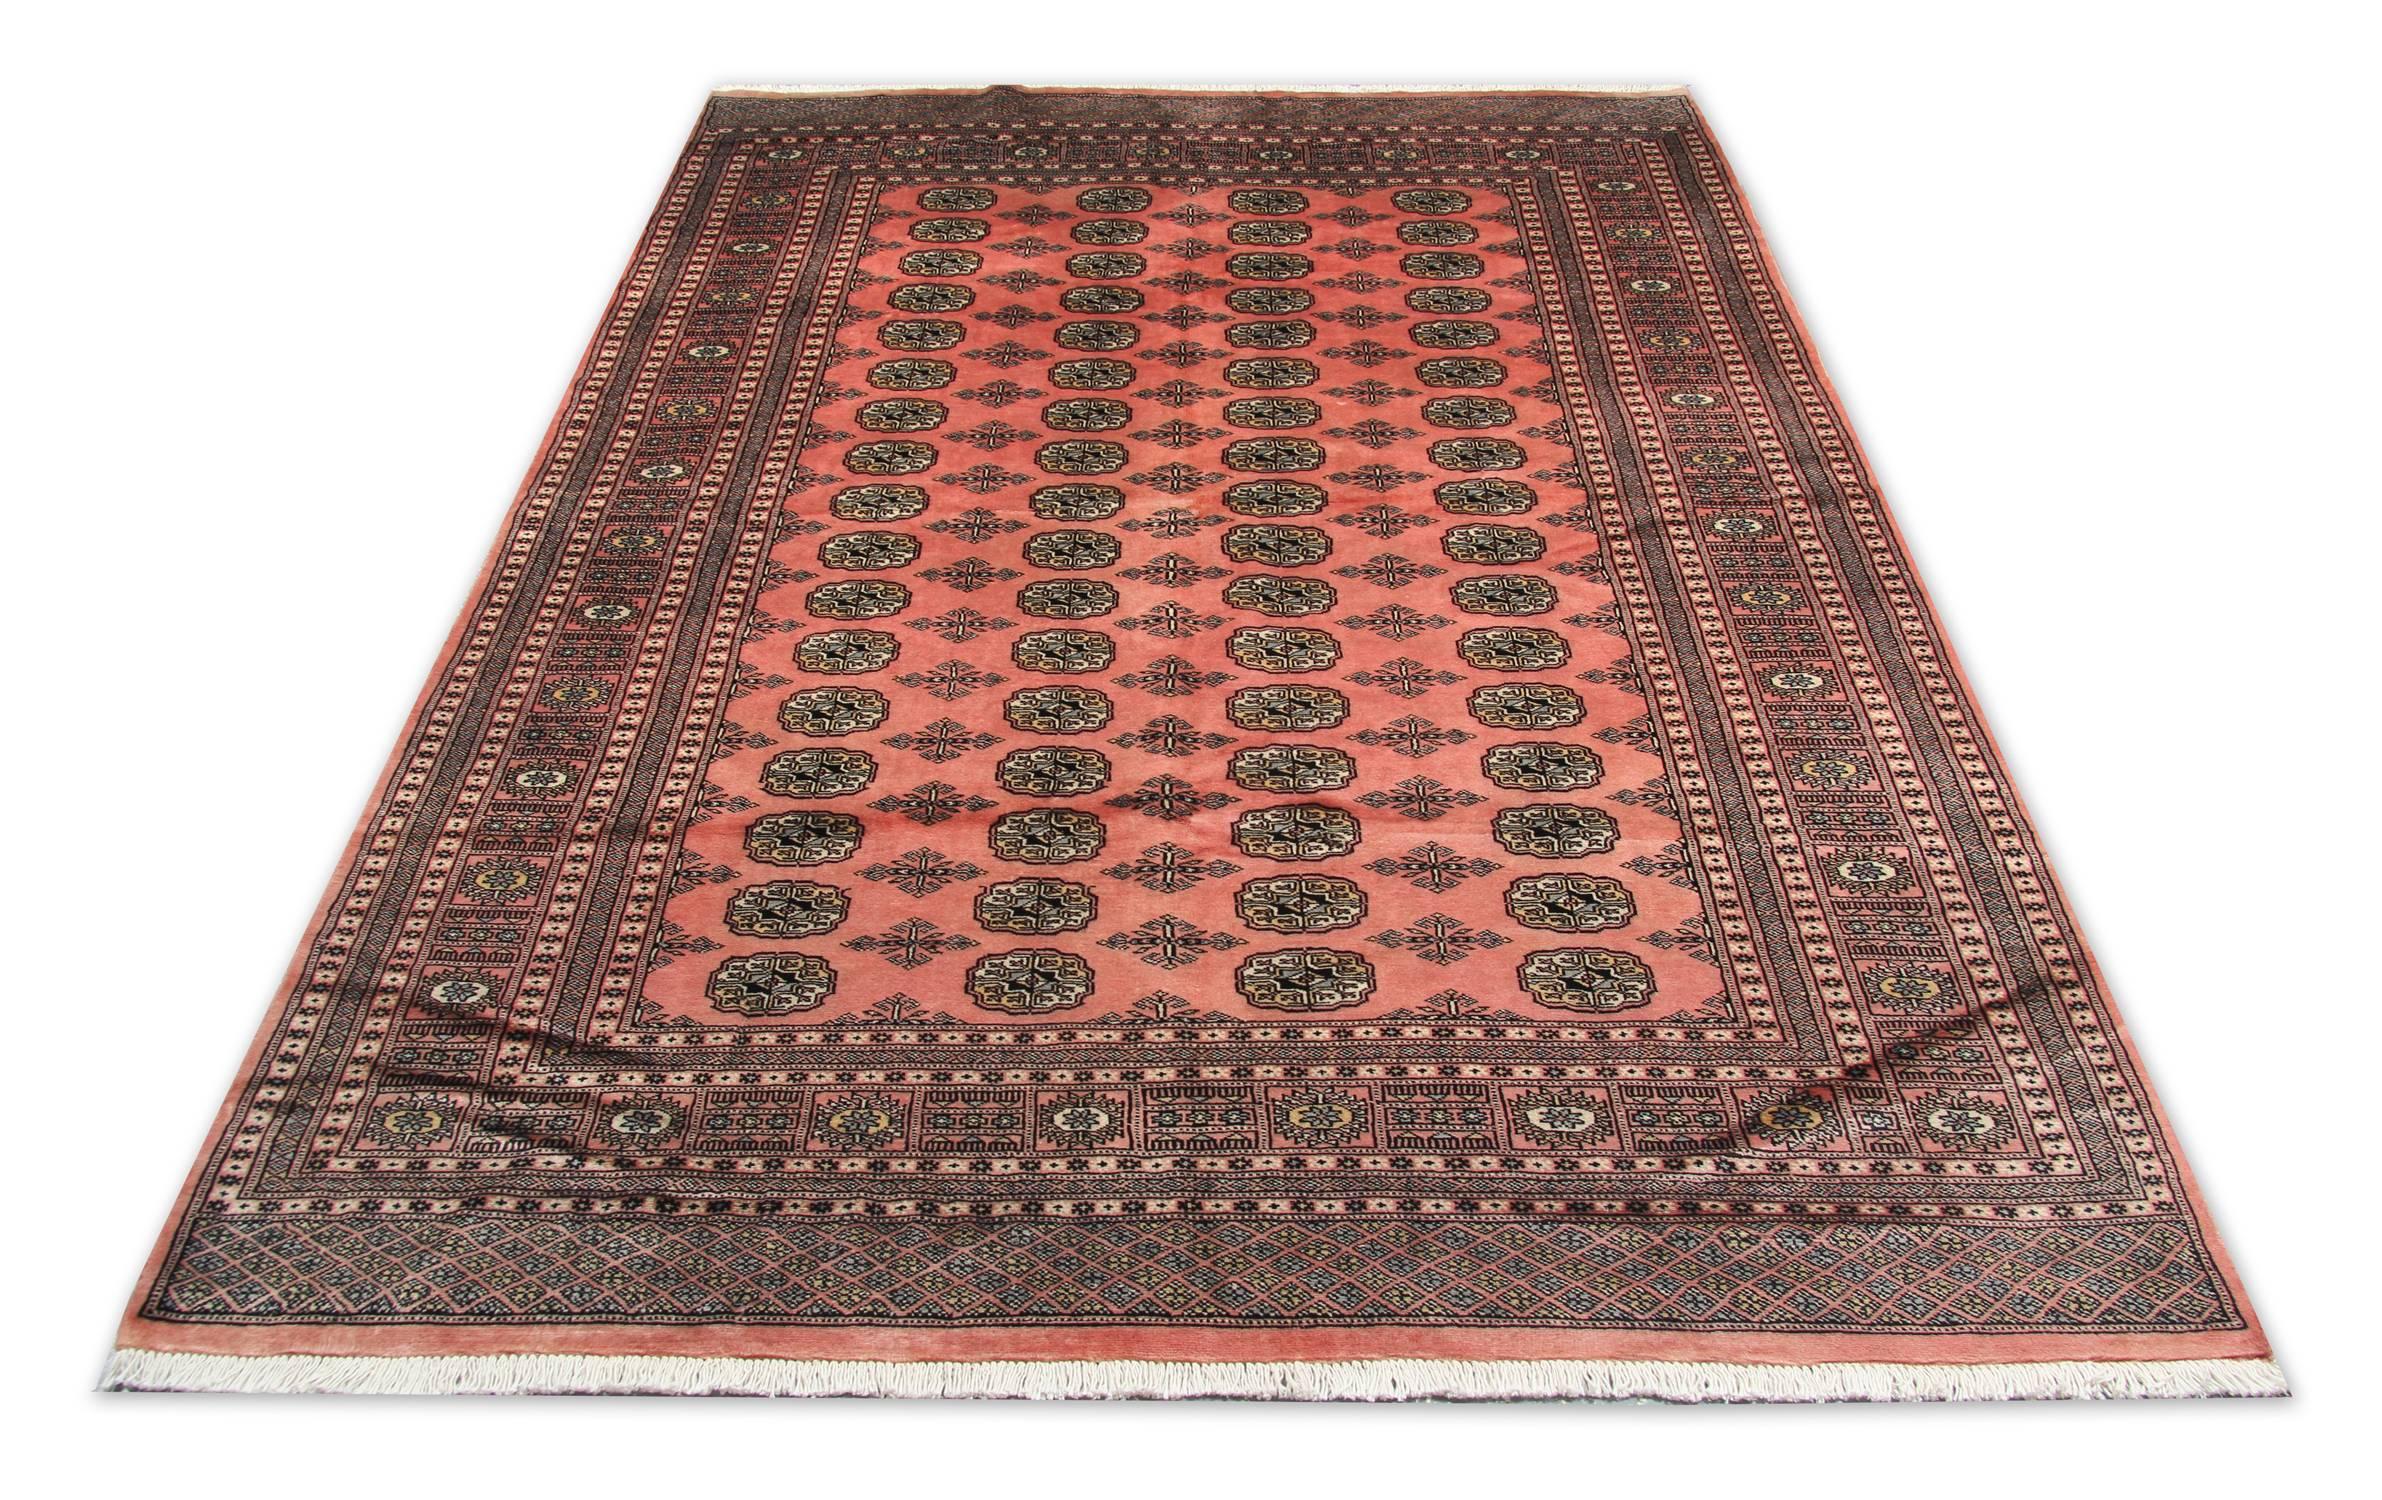 Bokhara vintage rugs and hallway runners are hand-knotted in Pakistan by master weavers in a traditional elephant's foot motif. The 100% Wool pile is dyed and washed to create a lustre that is unique to this Classic collection. Buy online for huge